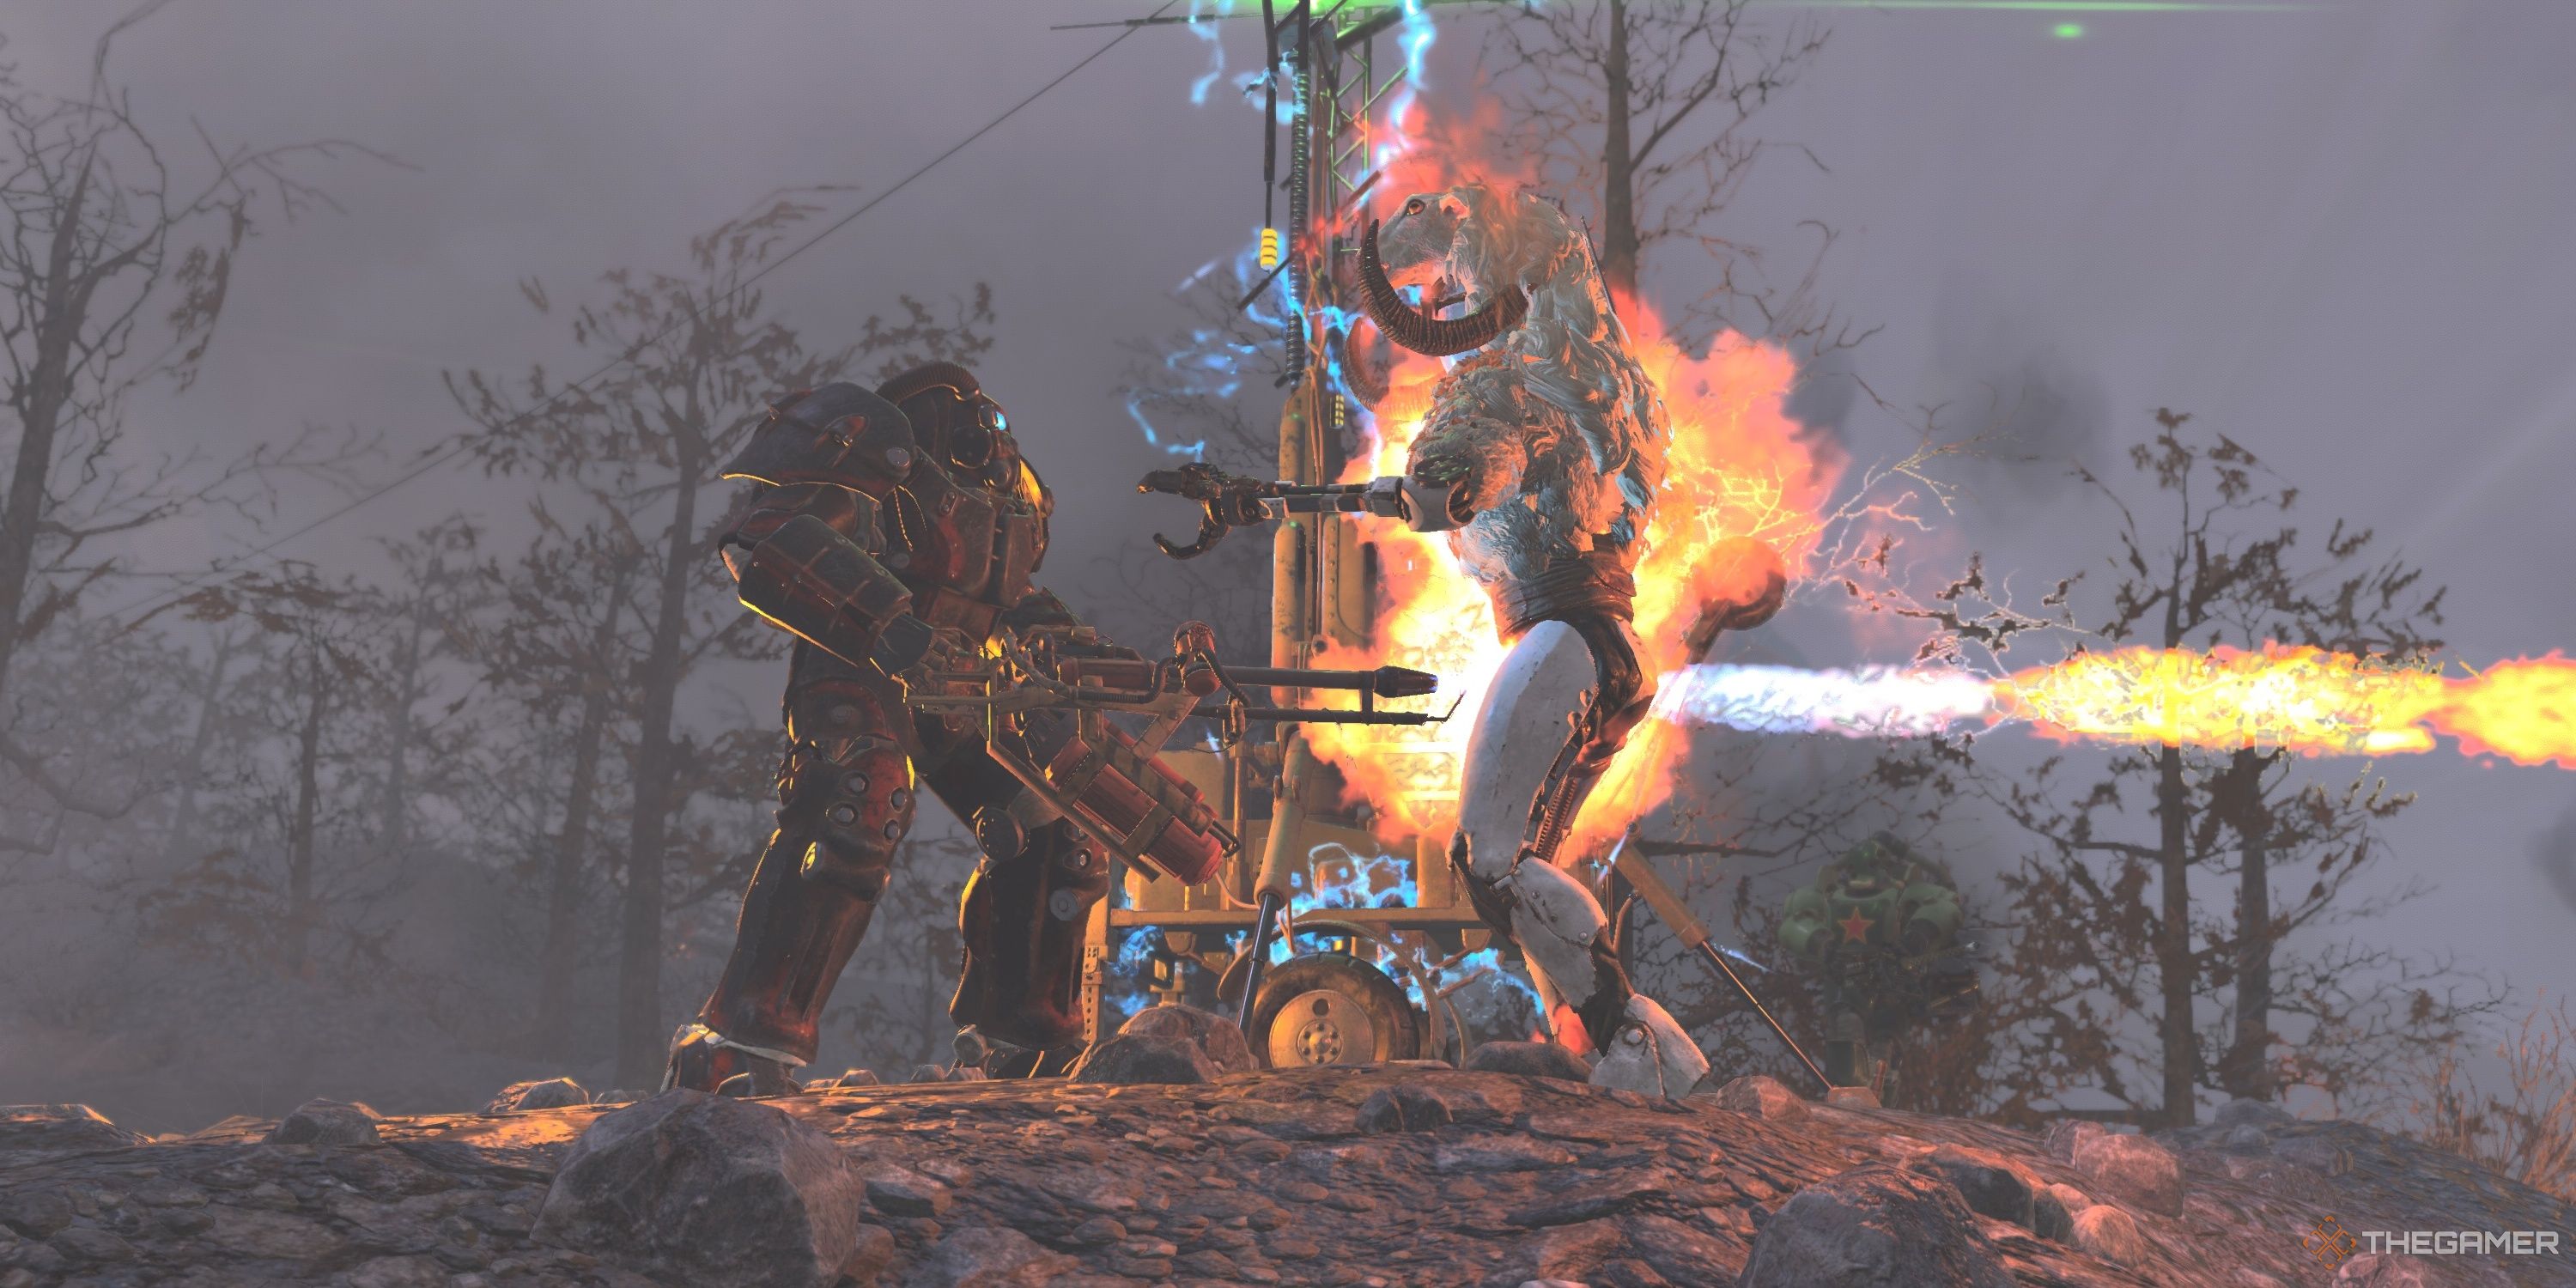 A Vault Dweller in Power Armor uses a flamer on an Imposter Sheepsquatch in Fallout 76.